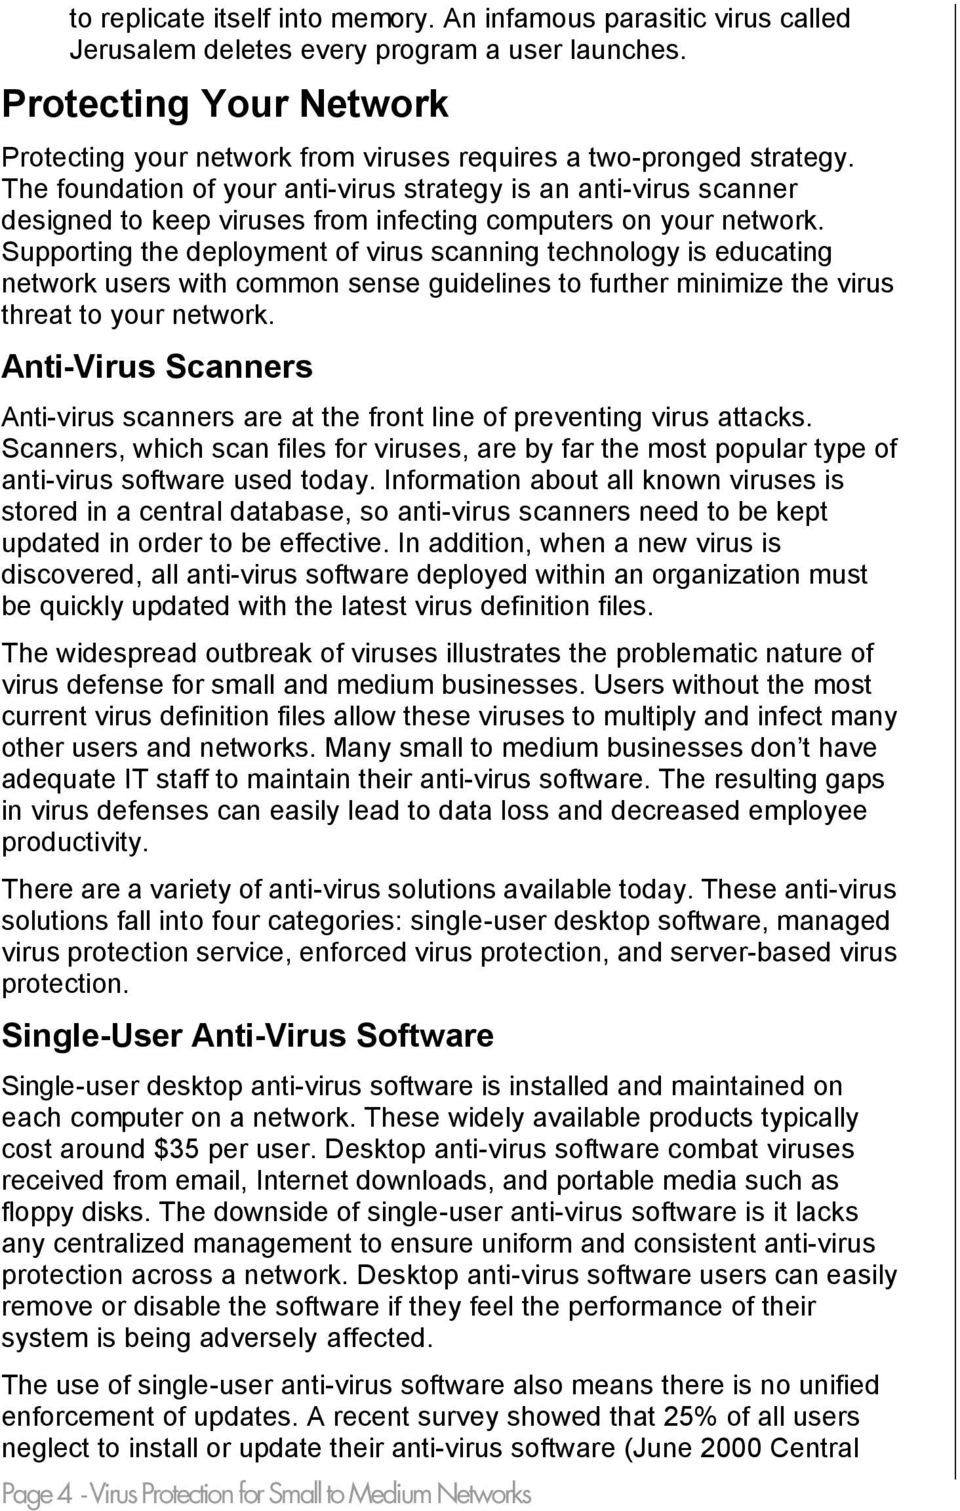 The foundation of your anti-virus strategy is an anti-virus scanner designed to keep viruses from infecting computers on your network.